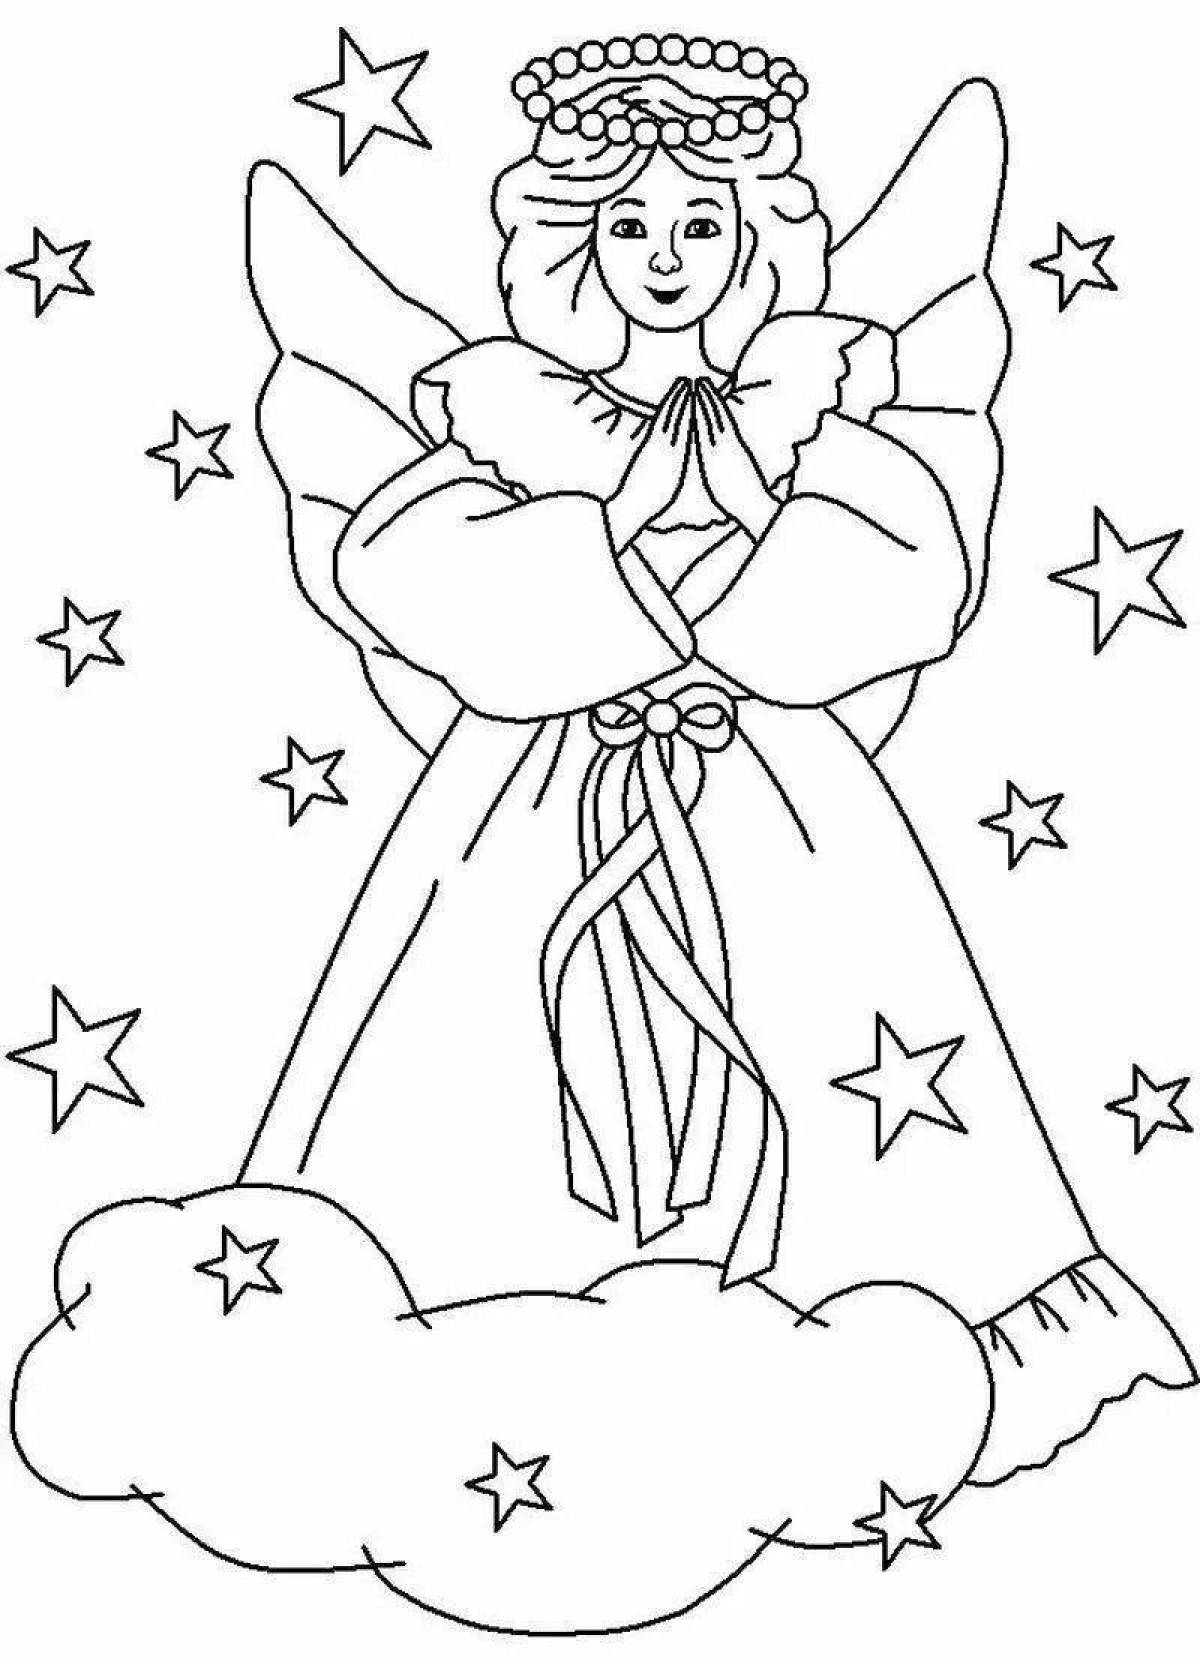 Sublime Christmas angel coloring